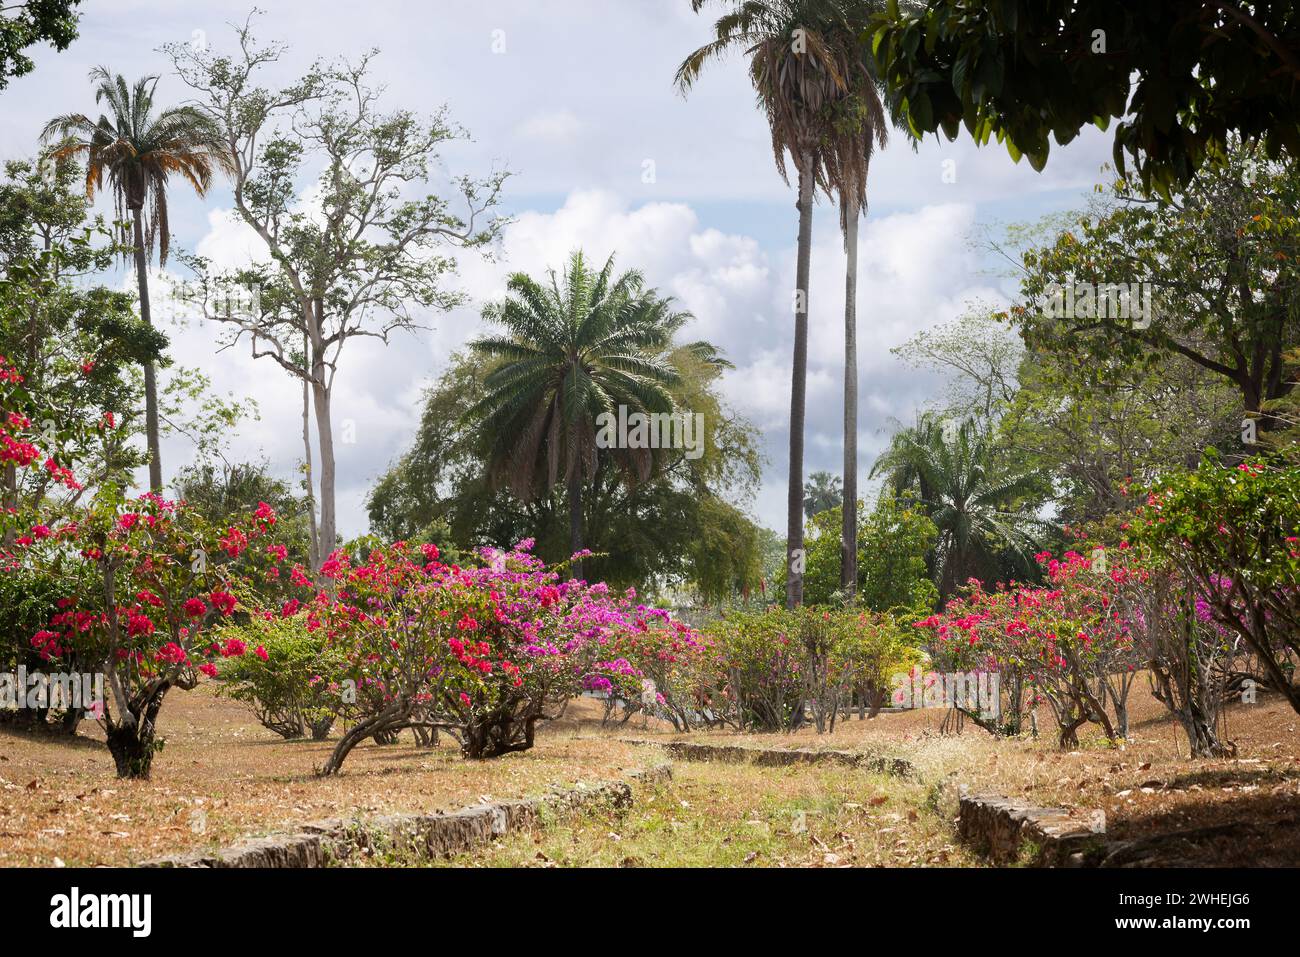 Botanic gardens park tropical flowers and trees in bloom colorful growth lush scenery Stock Photo